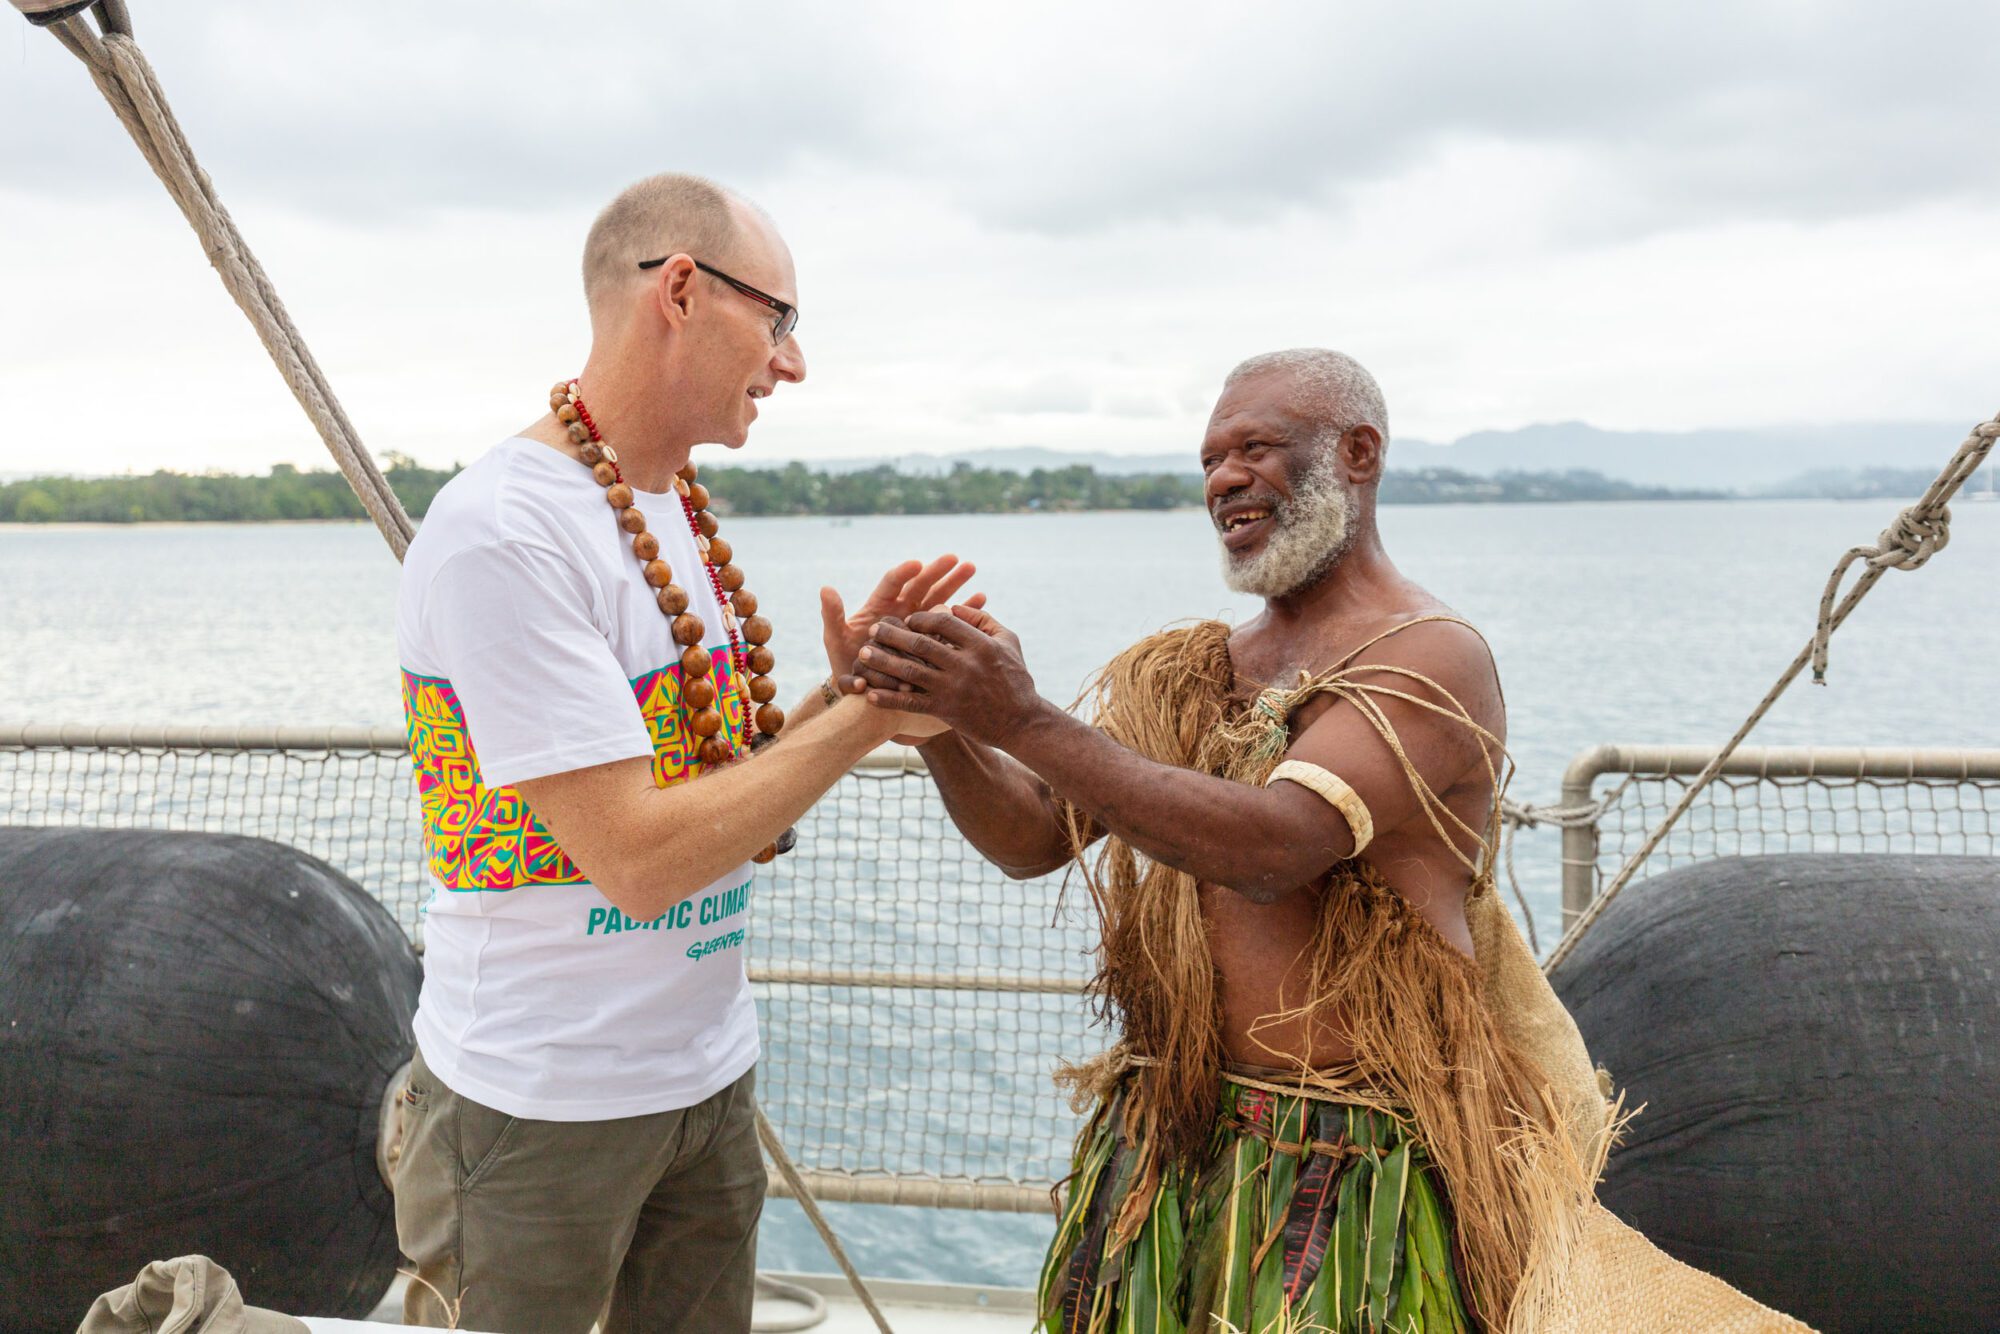 A white man in a white t-shirt stands facing a man of colour with white beard wearing a garment made of straw. They are smiling and clasping each others hands.